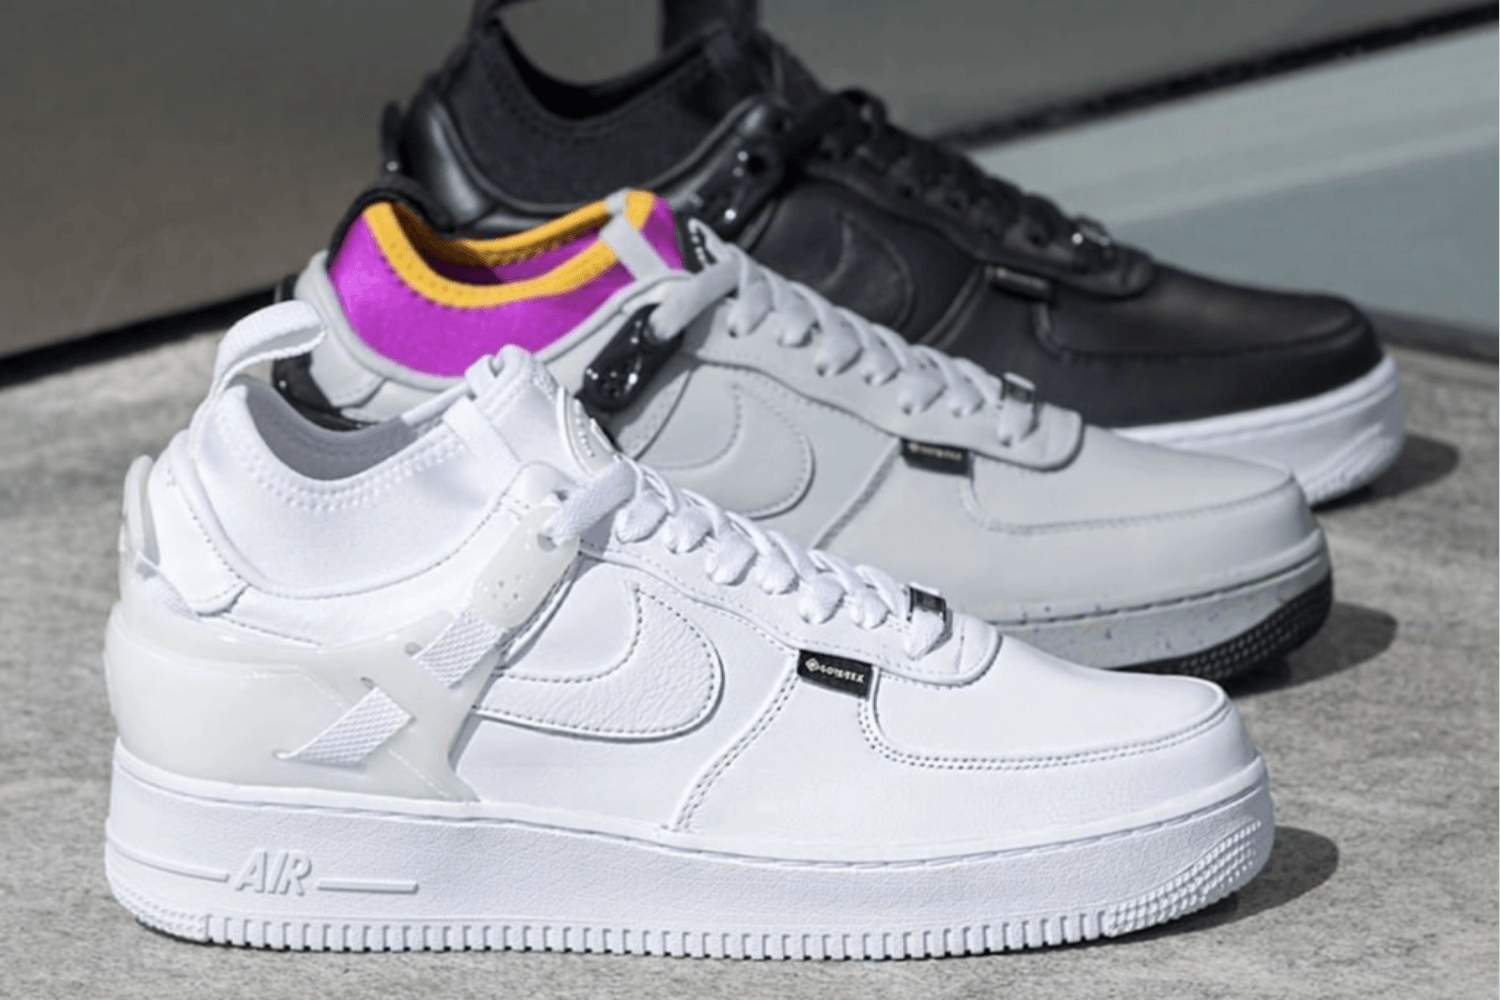 How to style the UNDERCOVER x Nike Air Force 1 Low